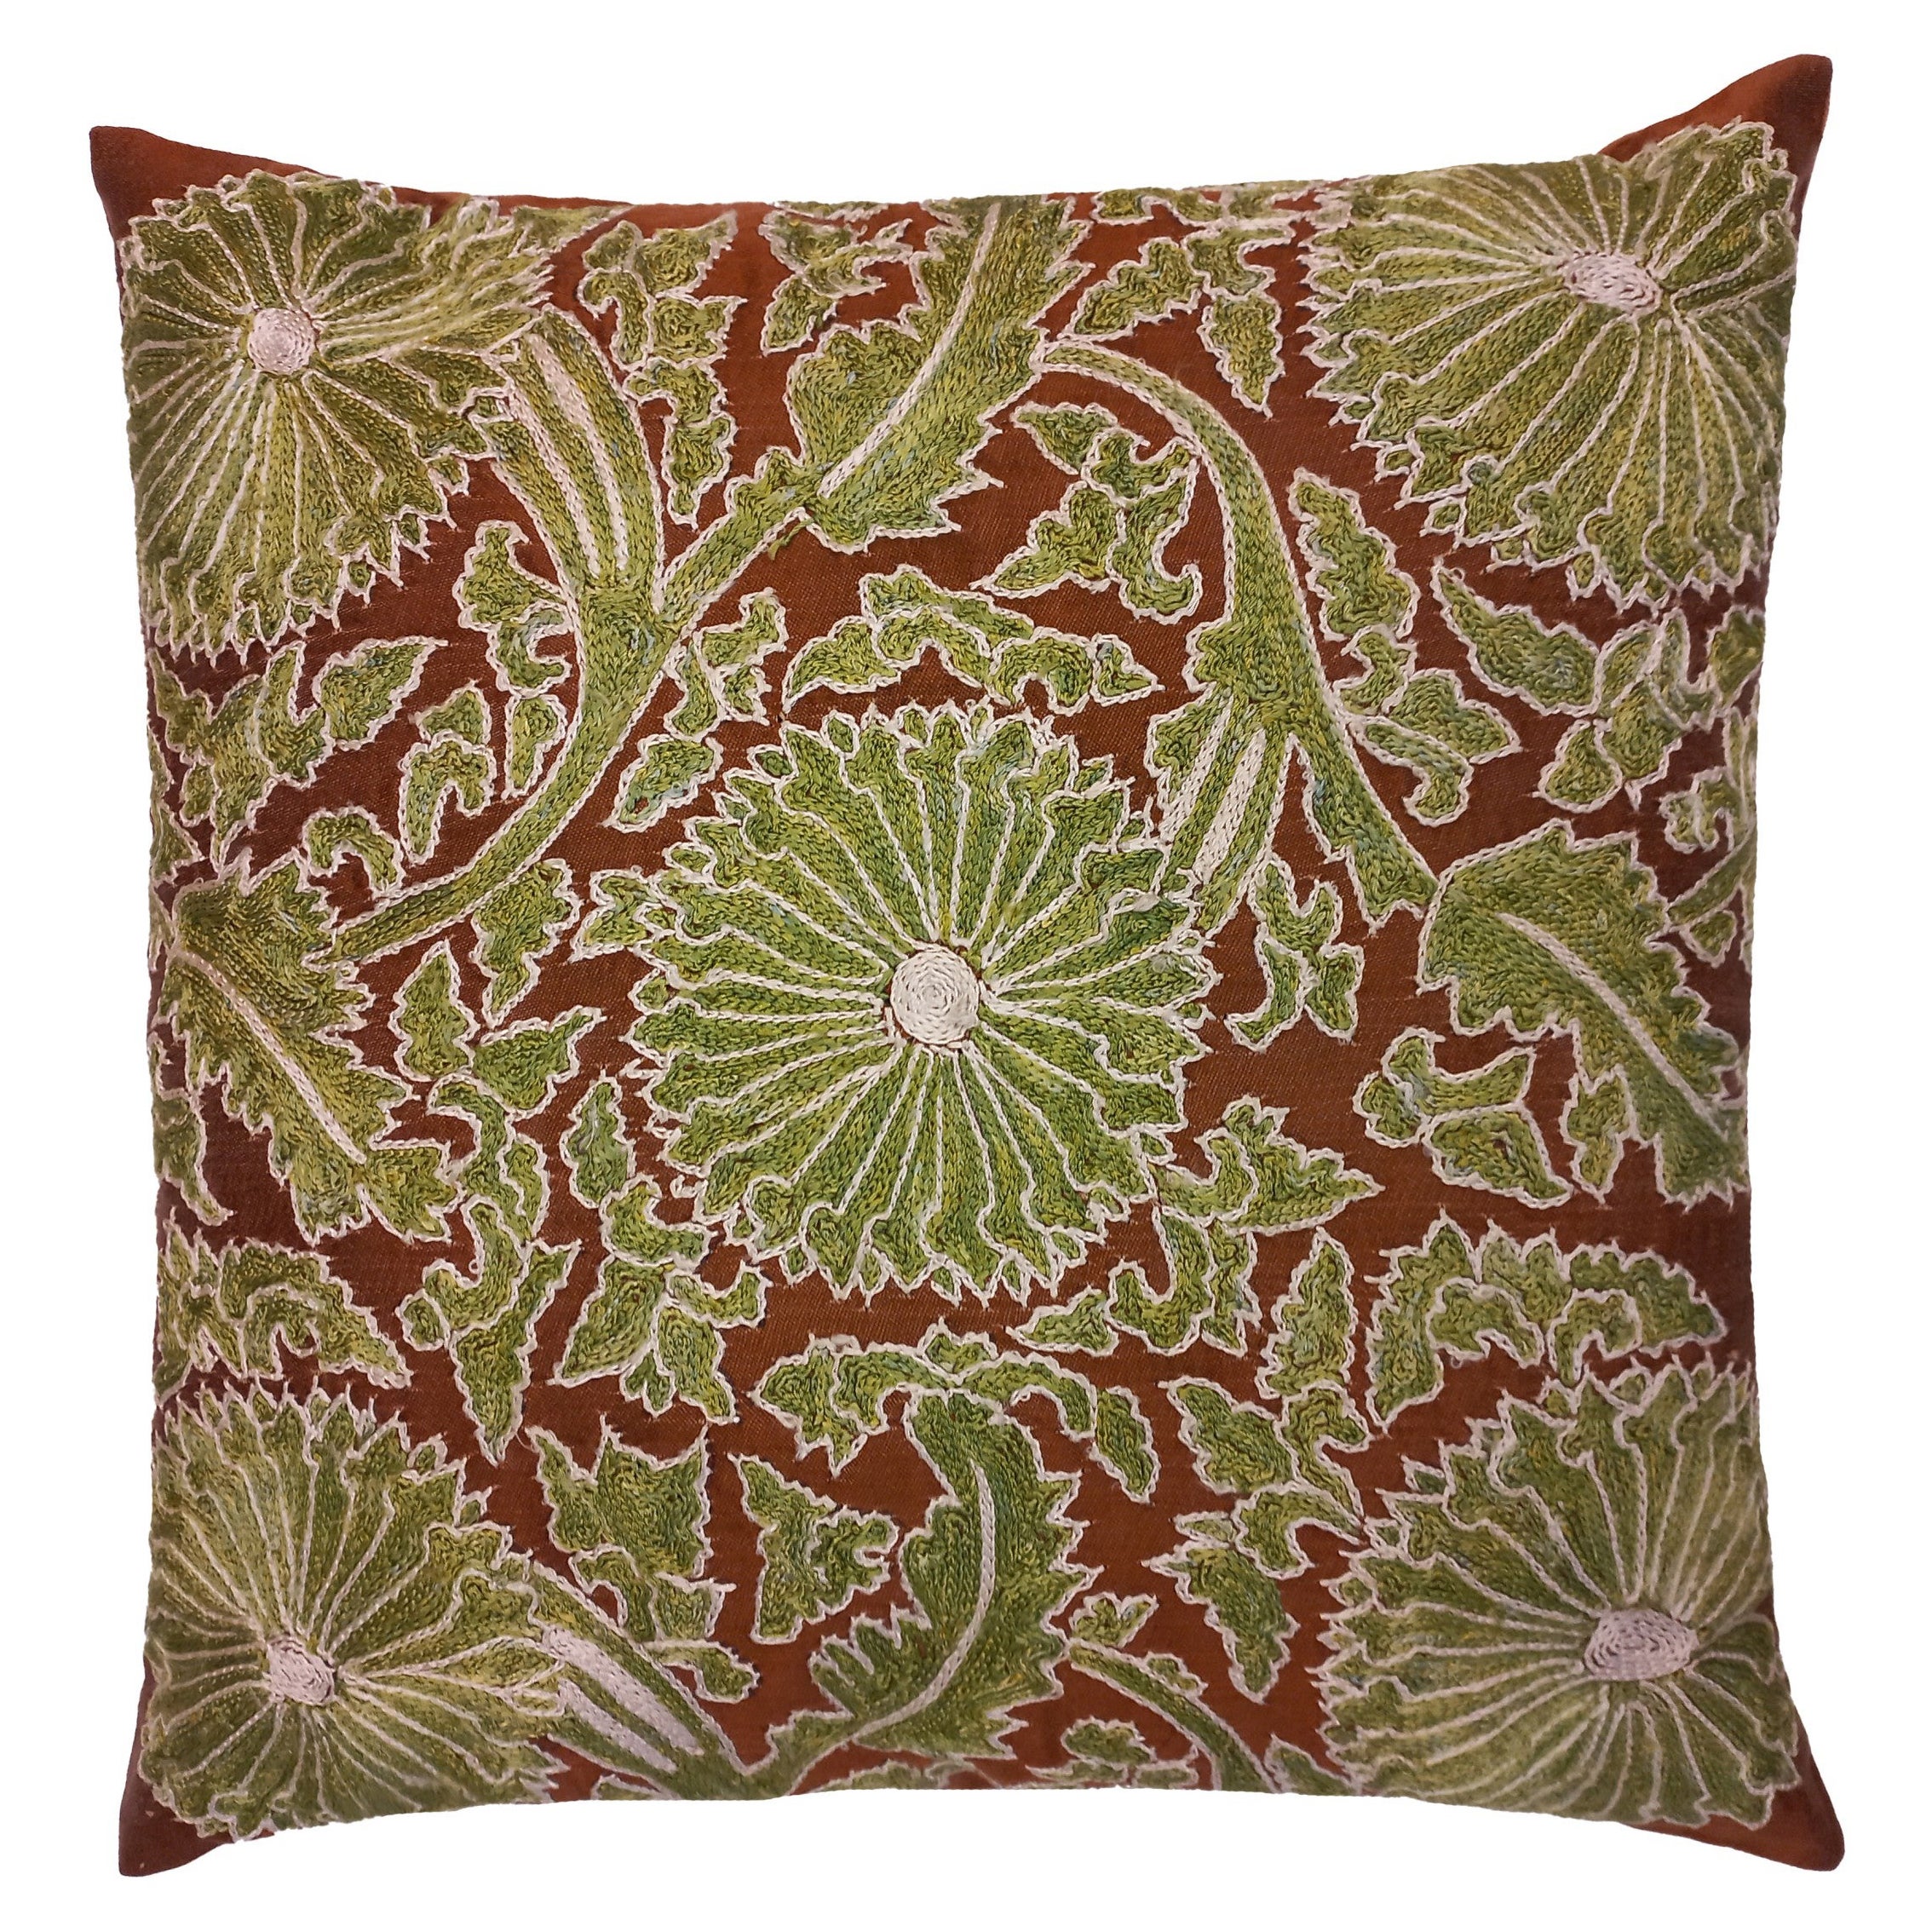 18"x19" Embroidered 100% Silk Cushion Cover in Brown & Green, Suzani Pillowcase For Sale